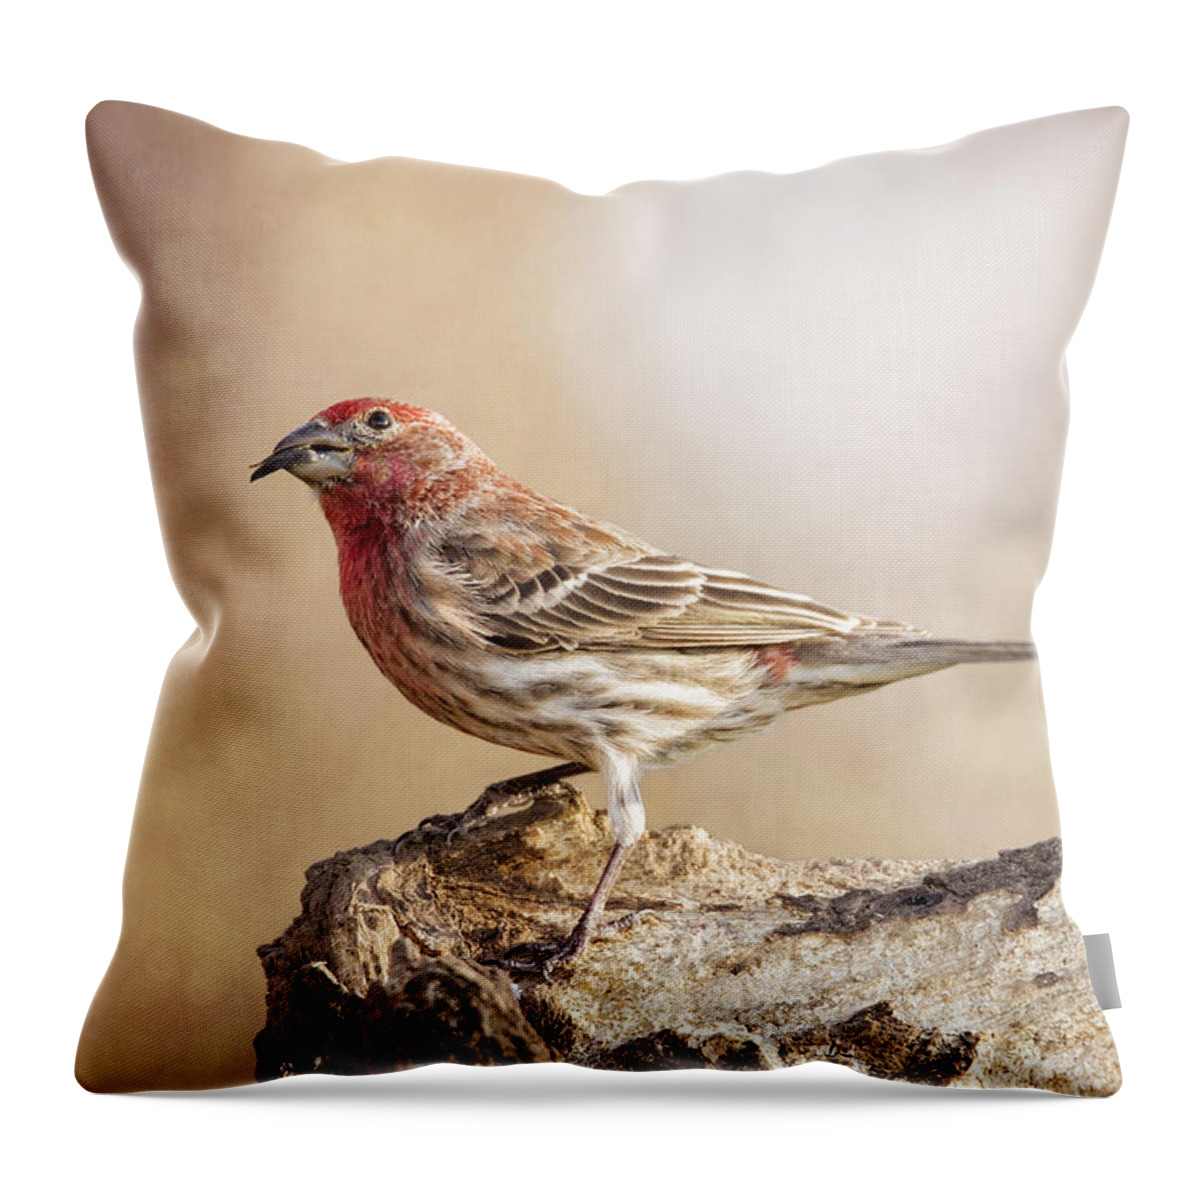 Chordata Throw Pillow featuring the photograph Finch On Pastel Pinks by Bill and Linda Tiepelman